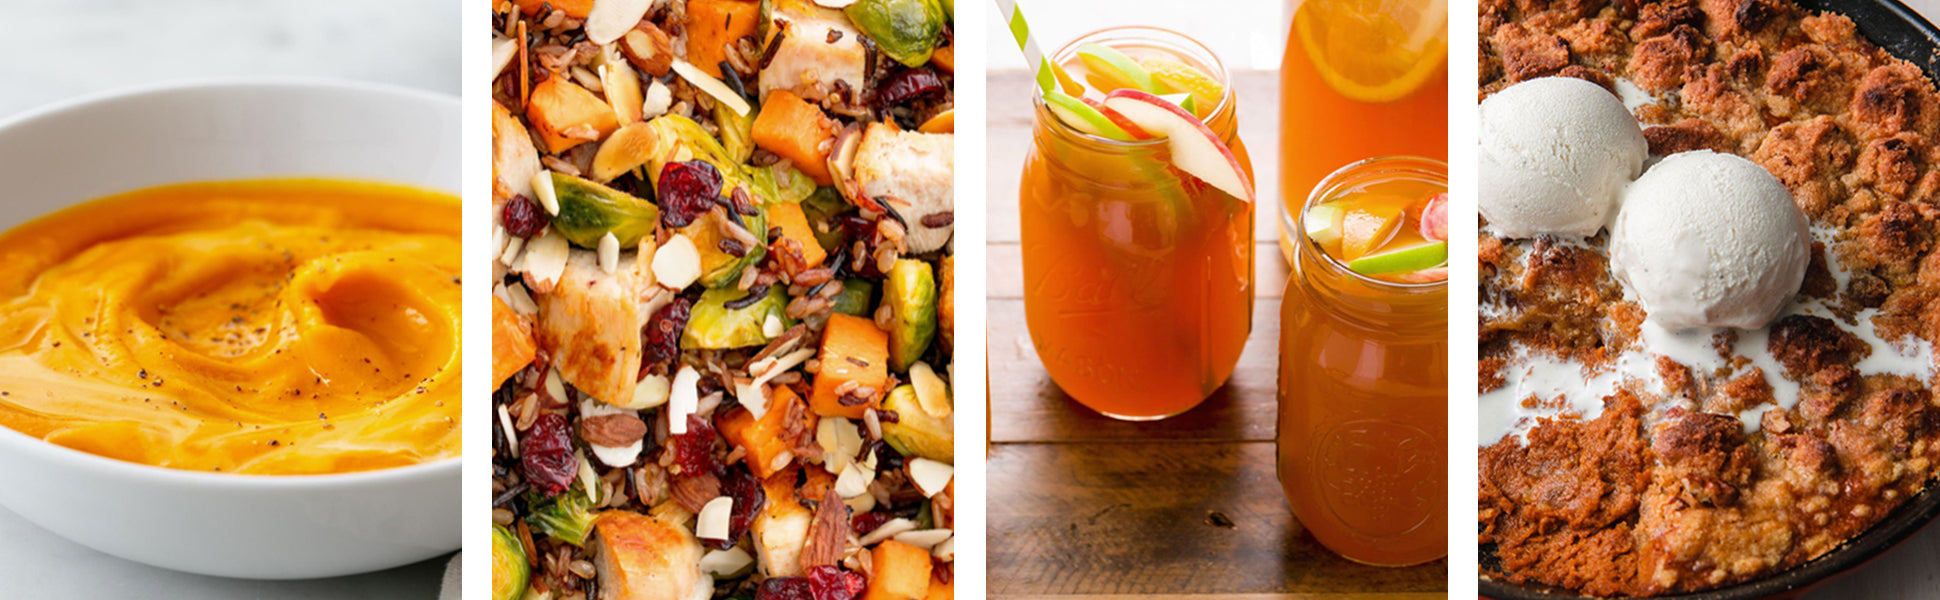 4 Seasonal Recipes You Will Fall in Love With!